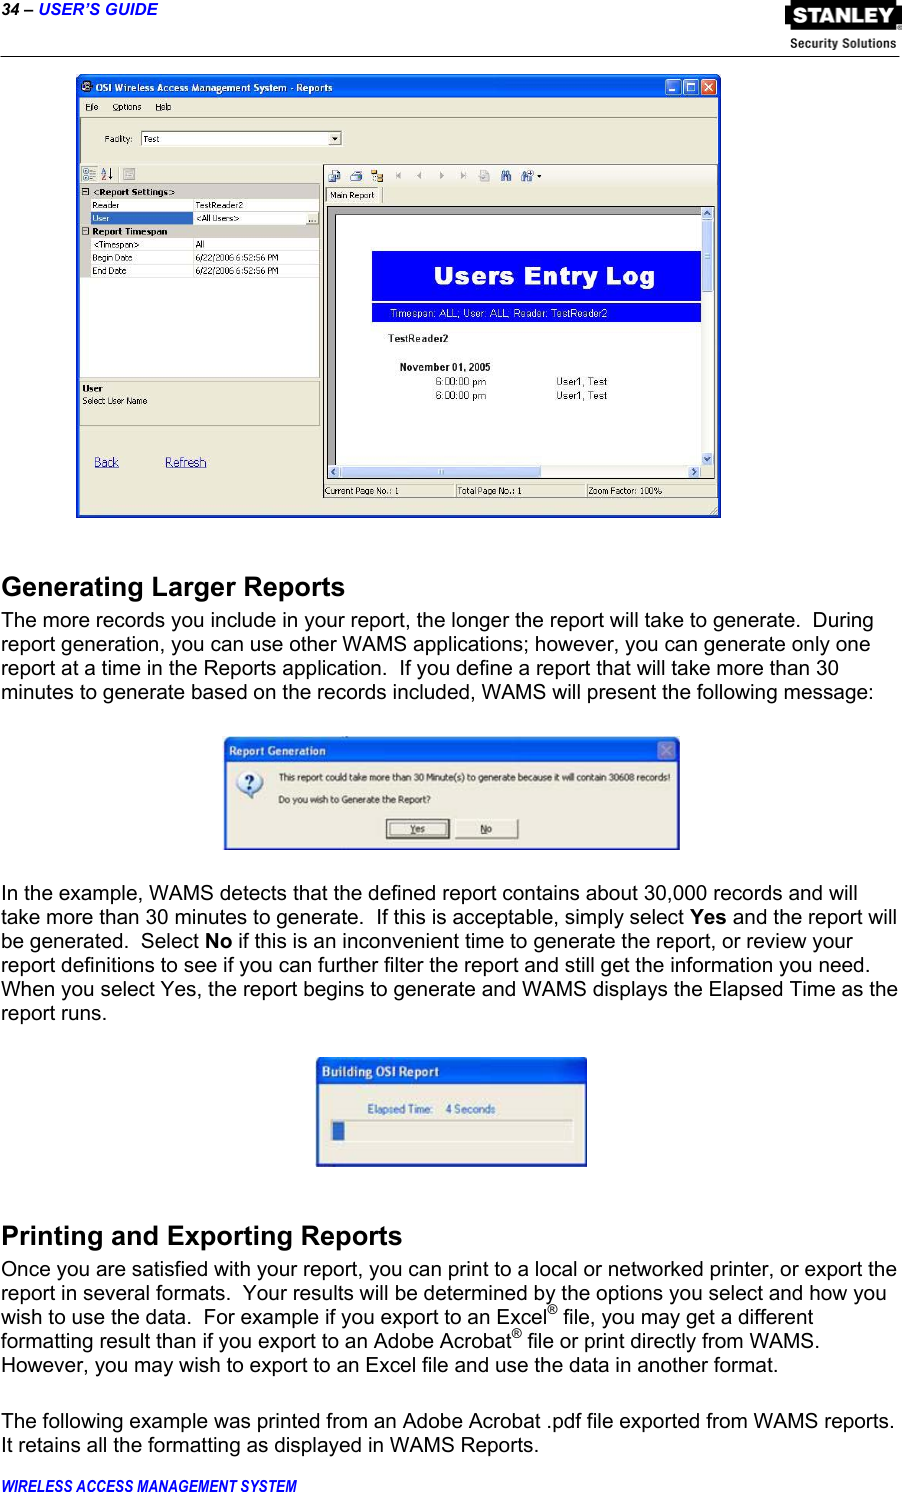 34 – USER’S GUIDE  WIRELESS ACCESS MANAGEMENT SYSTEM   Generating Larger Reports The more records you include in your report, the longer the report will take to generate.  During report generation, you can use other WAMS applications; however, you can generate only one report at a time in the Reports application.  If you define a report that will take more than 30 minutes to generate based on the records included, WAMS will present the following message:      In the example, WAMS detects that the defined report contains about 30,000 records and will take more than 30 minutes to generate.  If this is acceptable, simply select Yes and the report will be generated.  Select No if this is an inconvenient time to generate the report, or review your report definitions to see if you can further filter the report and still get the information you need.  When you select Yes, the report begins to generate and WAMS displays the Elapsed Time as the report runs.    Printing and Exporting Reports Once you are satisfied with your report, you can print to a local or networked printer, or export the report in several formats.  Your results will be determined by the options you select and how you wish to use the data.  For example if you export to an Excel® file, you may get a different formatting result than if you export to an Adobe Acrobat® file or print directly from WAMS.  However, you may wish to export to an Excel file and use the data in another format.  The following example was printed from an Adobe Acrobat .pdf file exported from WAMS reports.  It retains all the formatting as displayed in WAMS Reports. 